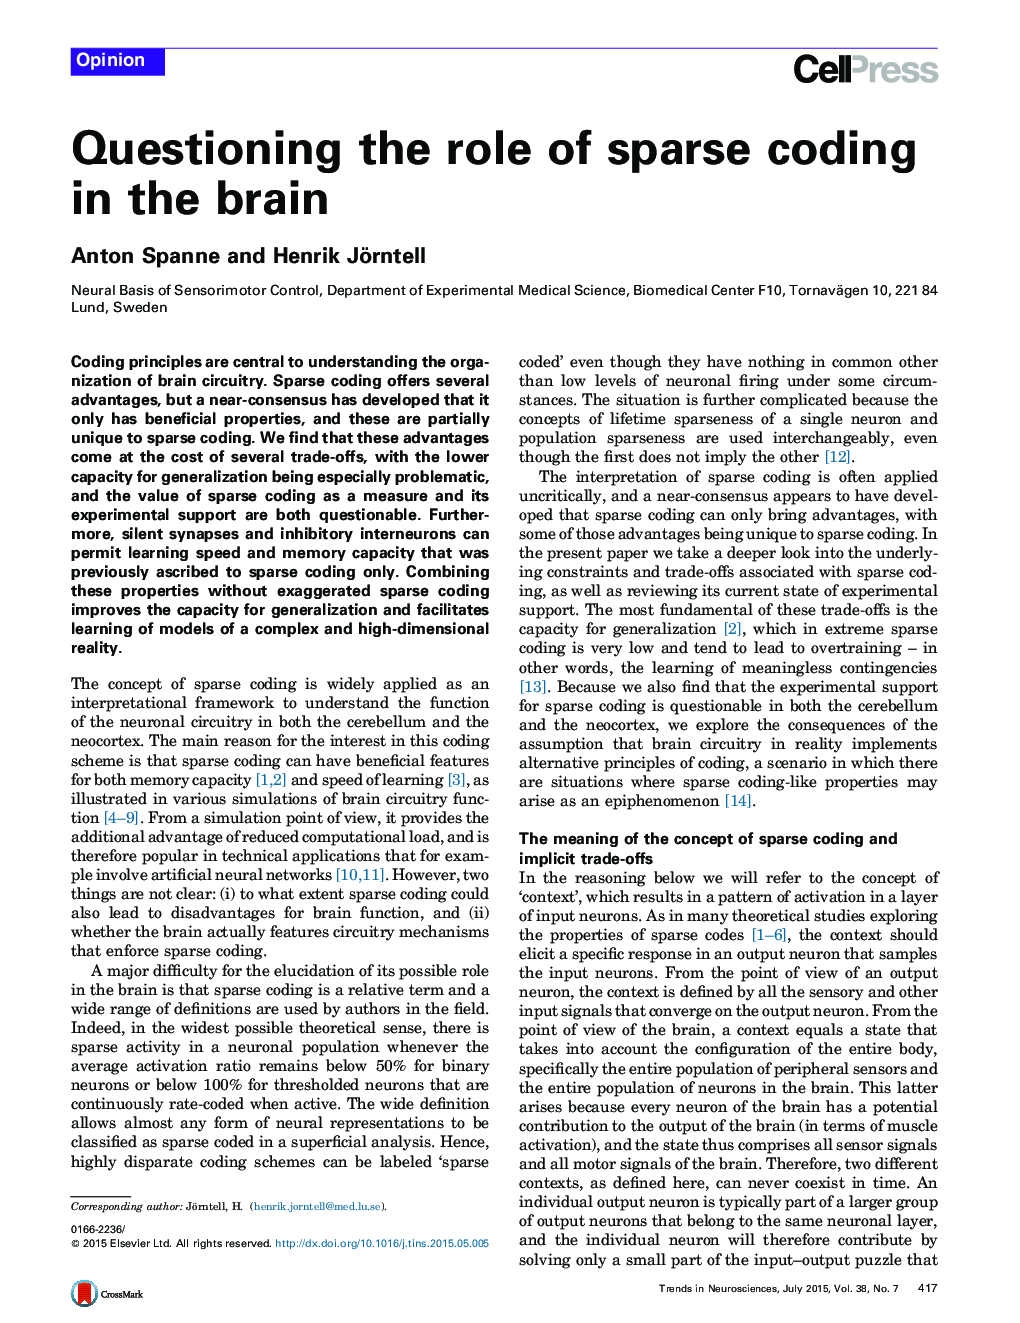 Questioning the role of sparse coding in the brain